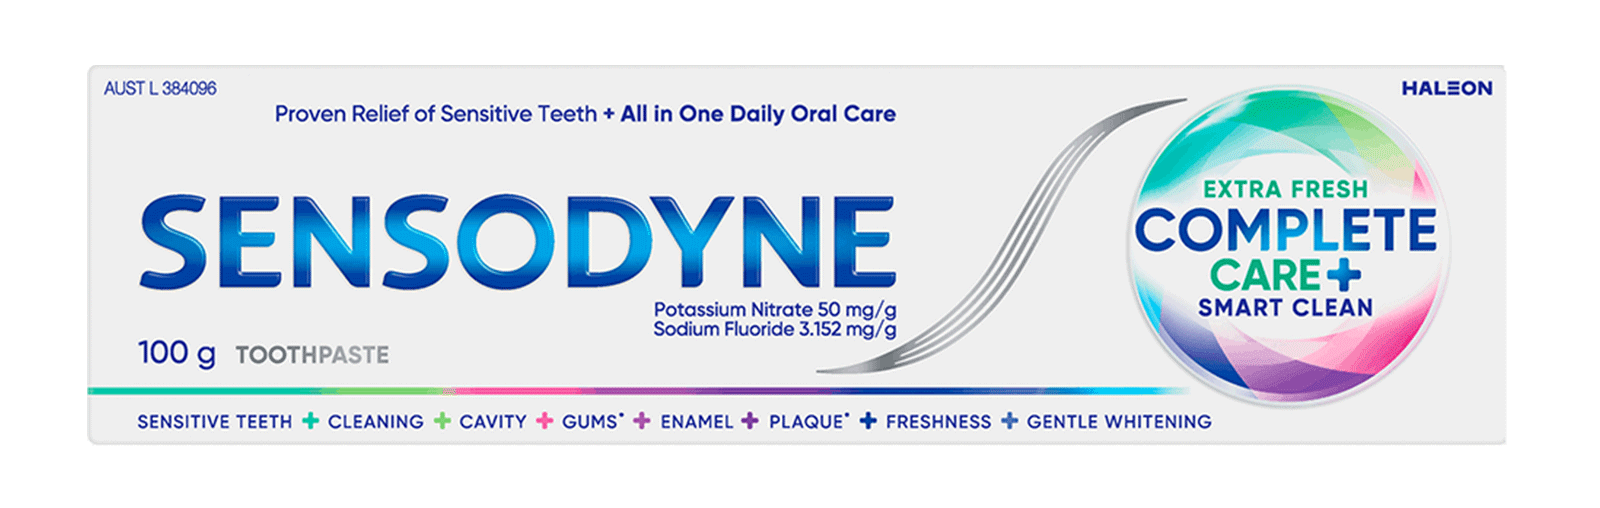 Sensodyne Complete Care + Smart Clean toothpaste in Extra Fresh